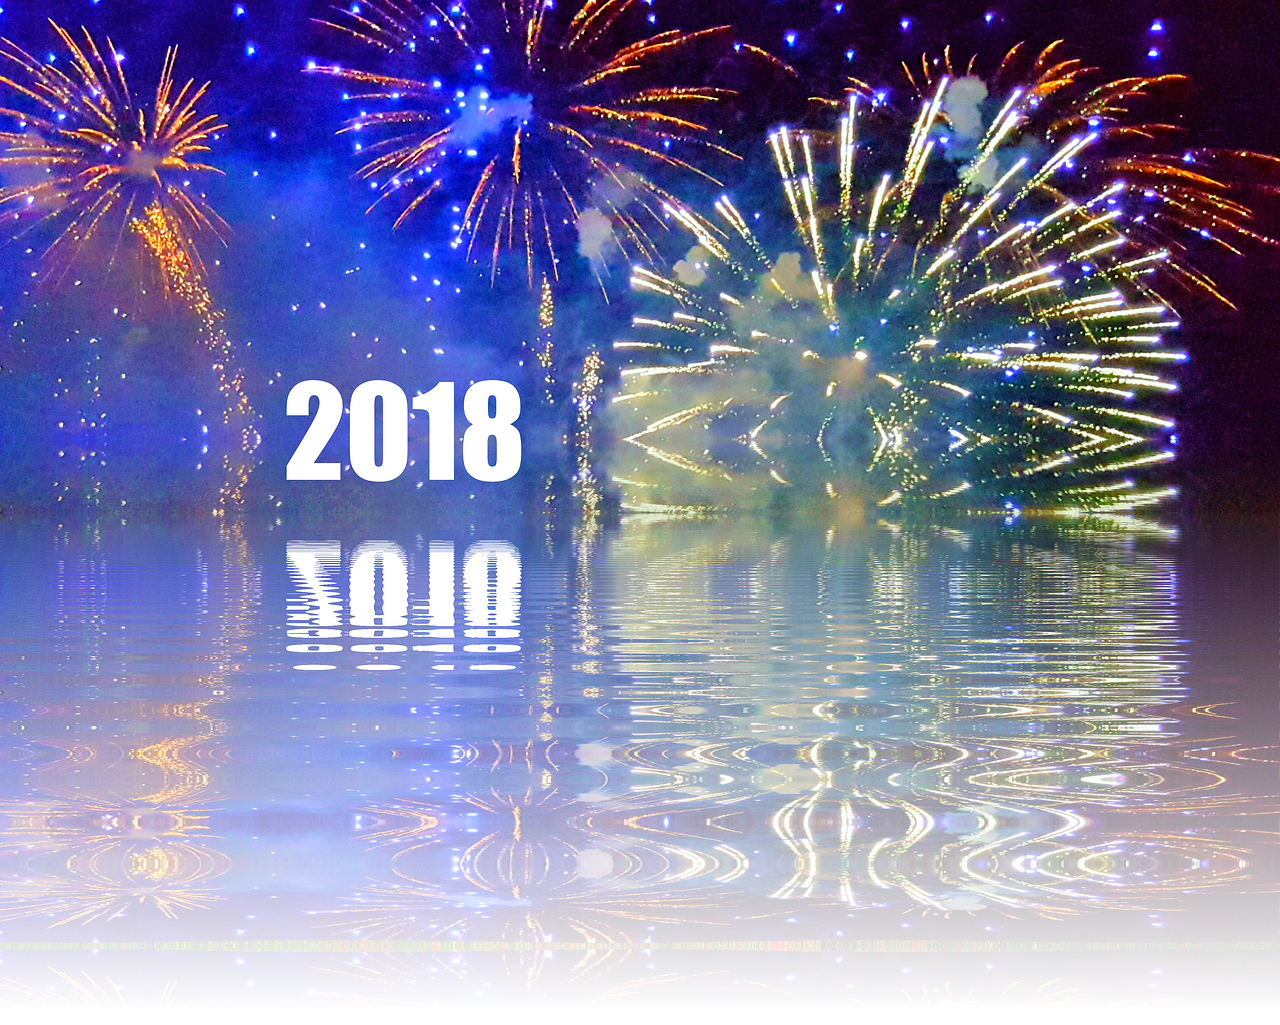 sylvester 2018 new year's day free photo